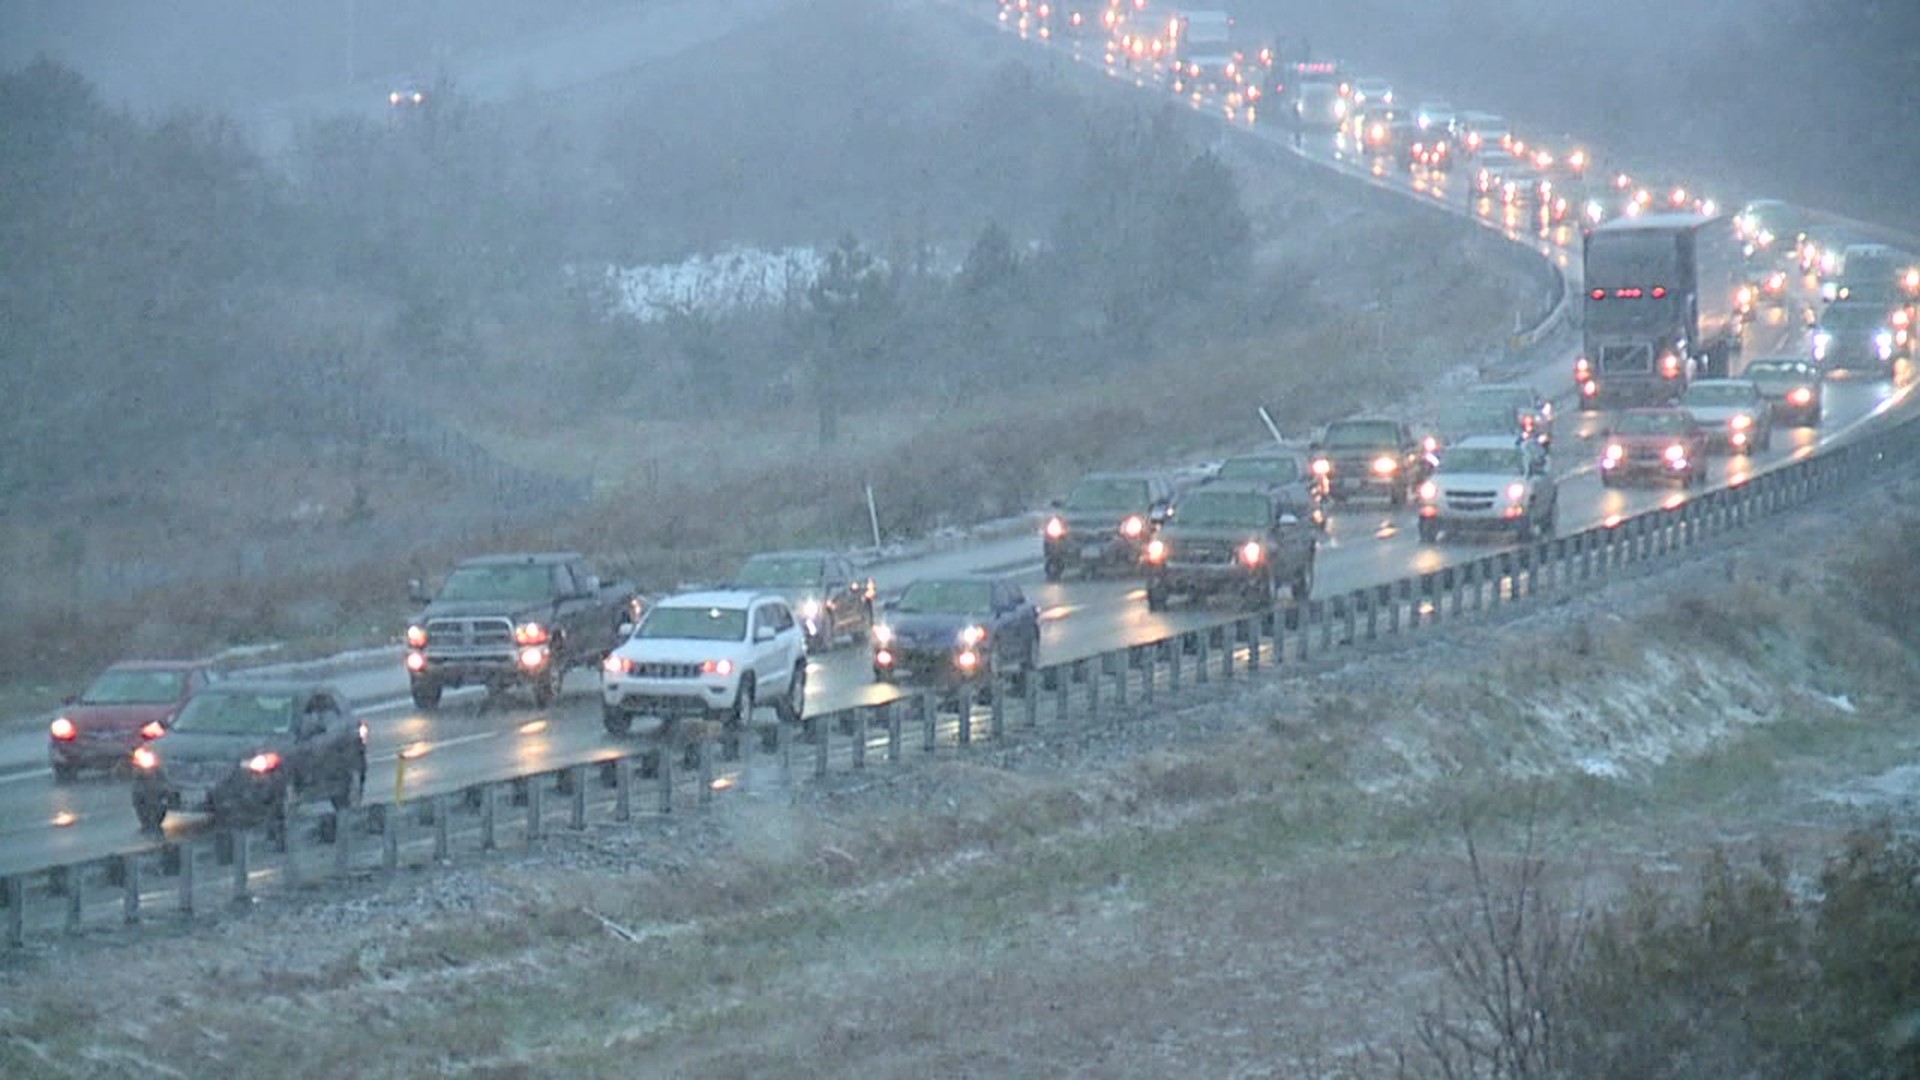 PennDOT officials say they are ready for whatever Mother Nature has in store ahead of a busy travel week.